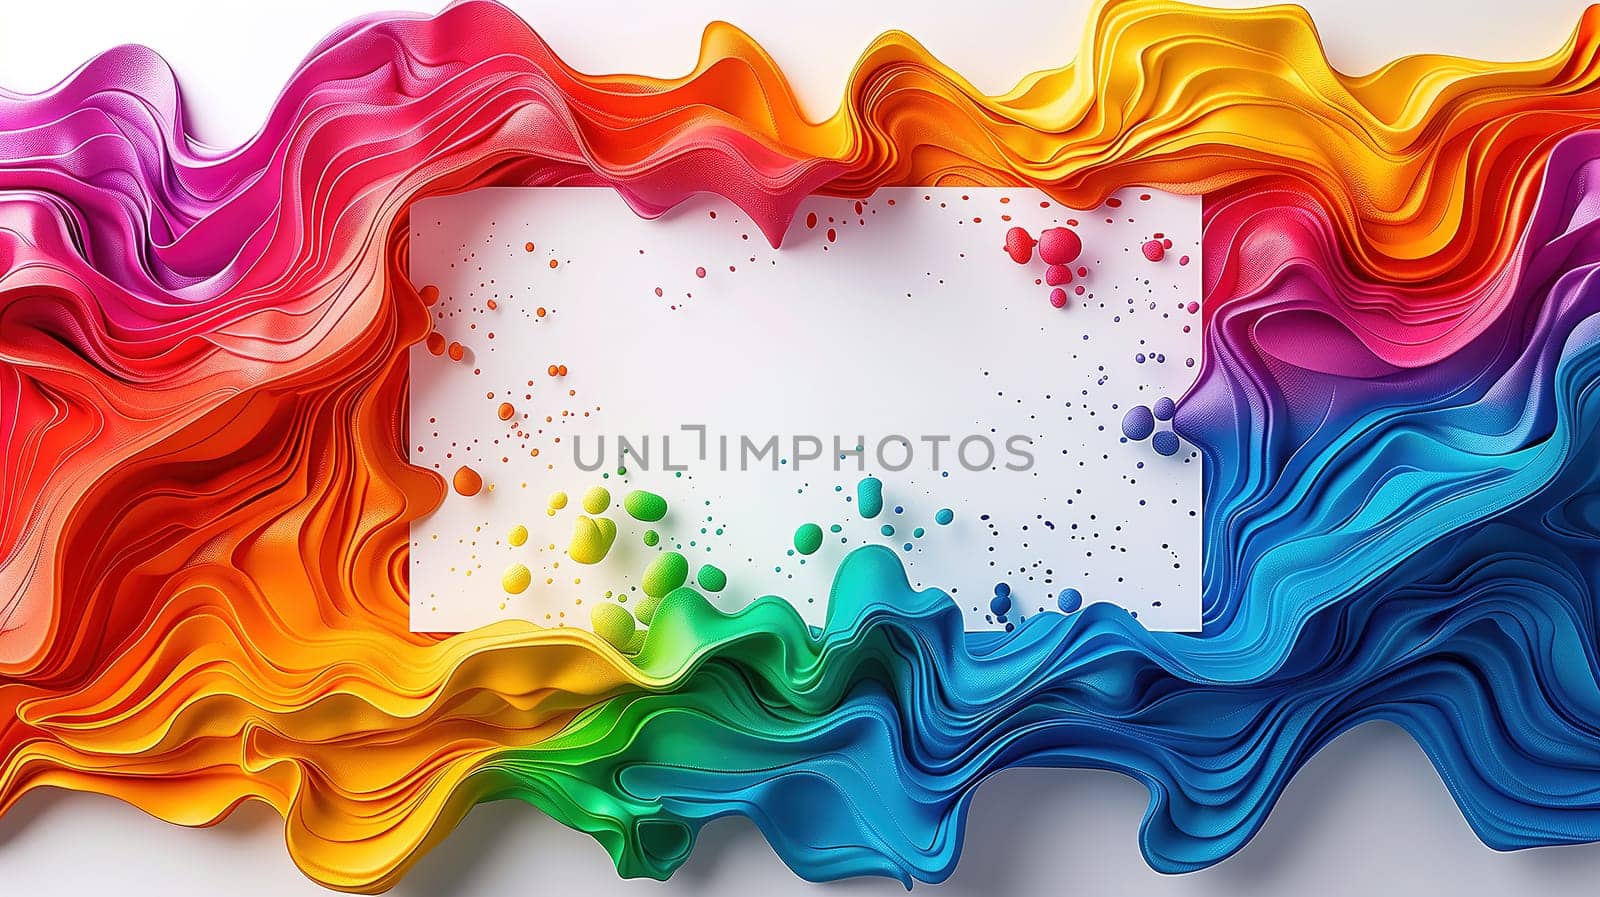 Vibrant Rainbow Waves of Fabric Celebrating LGBT Pride on a White Background by TRMK